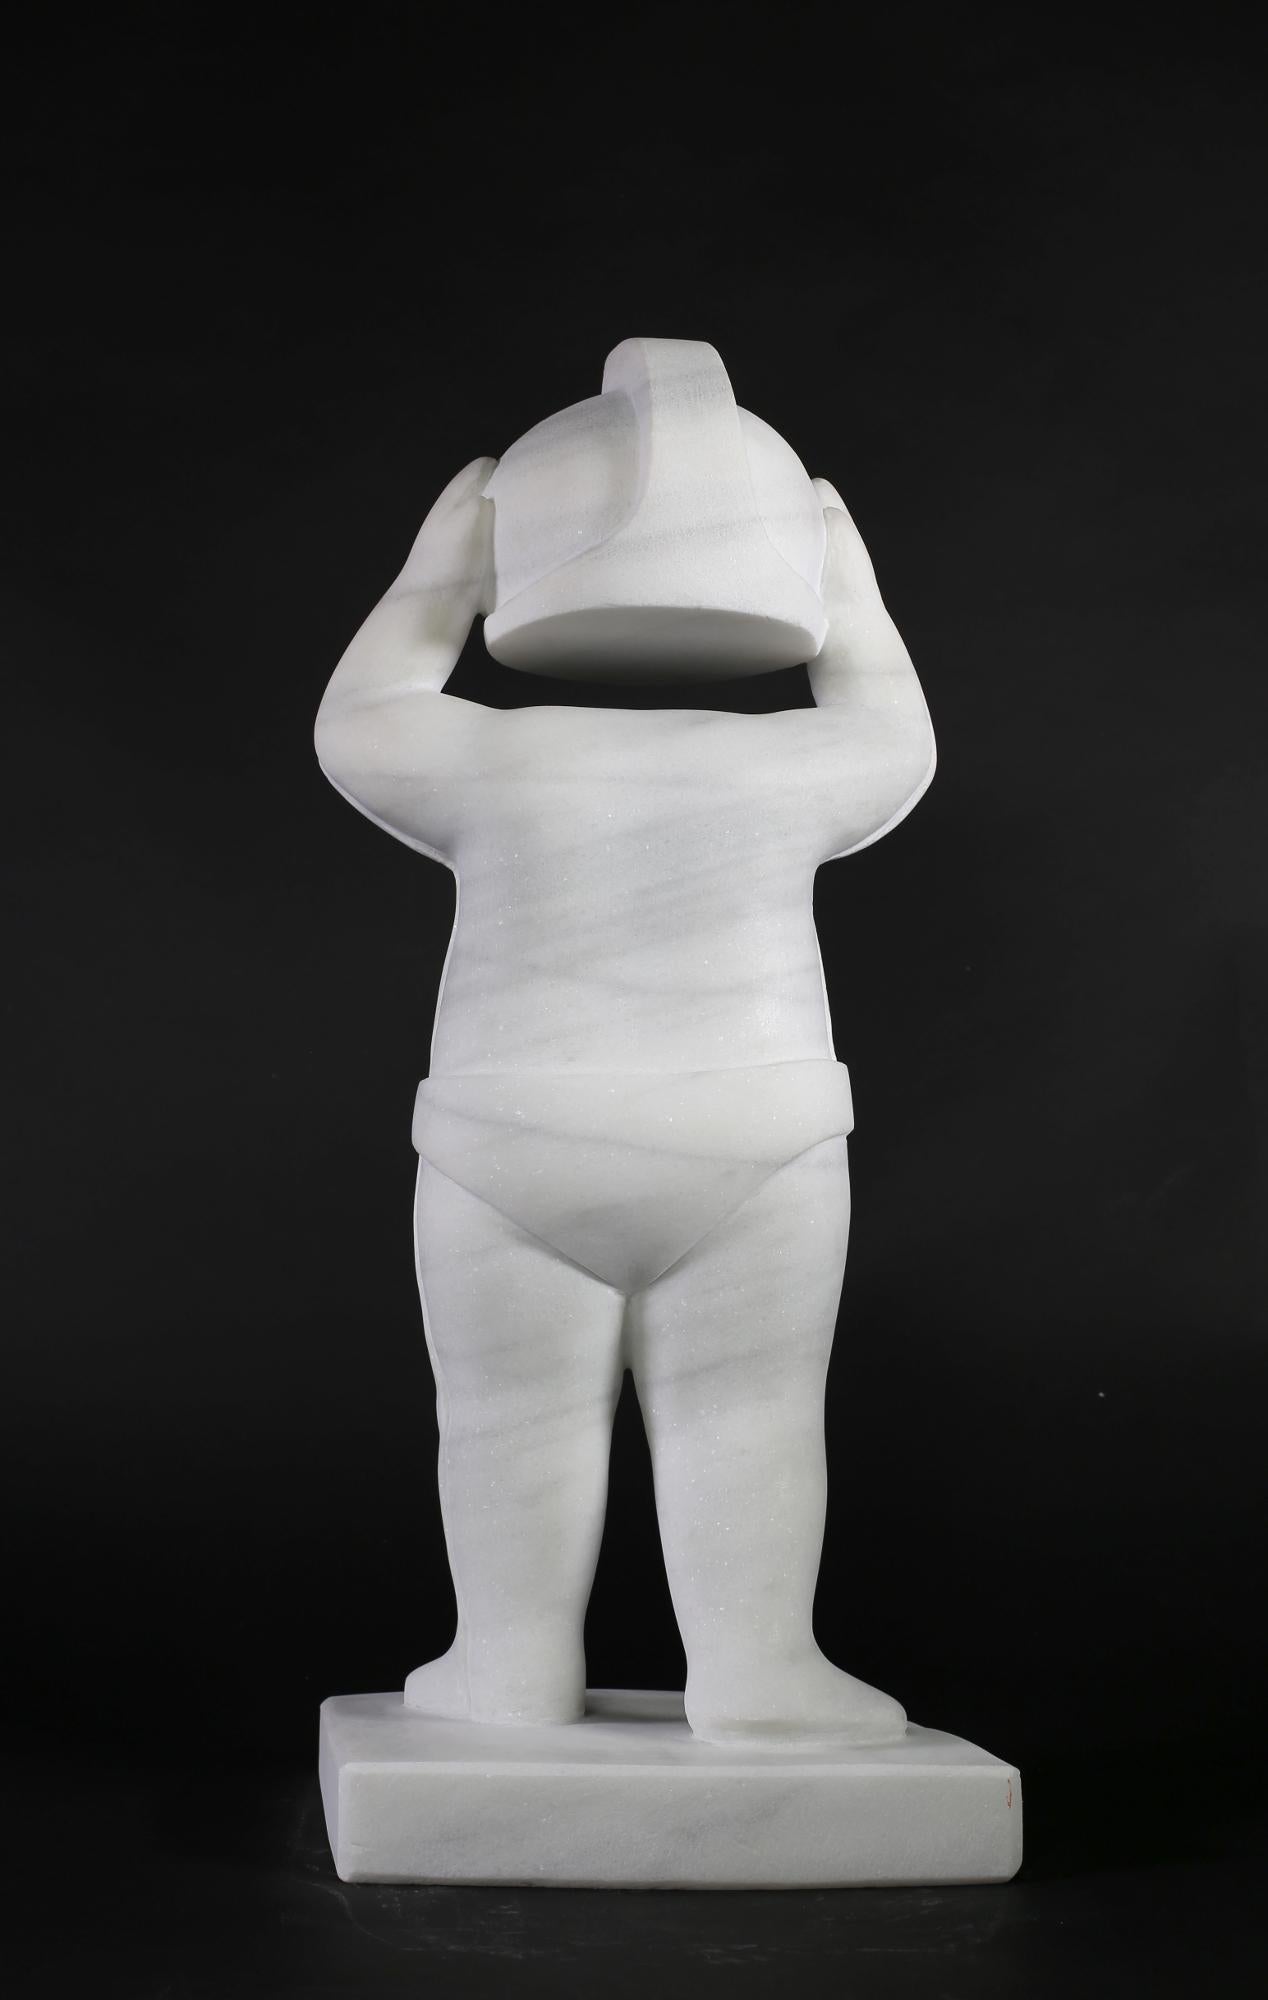 New Age Explorers. Nº1 Without Neck. Figurative Marble Sculpture by Mario Romero - Black Figurative Sculpture by Mario Romero Fernández